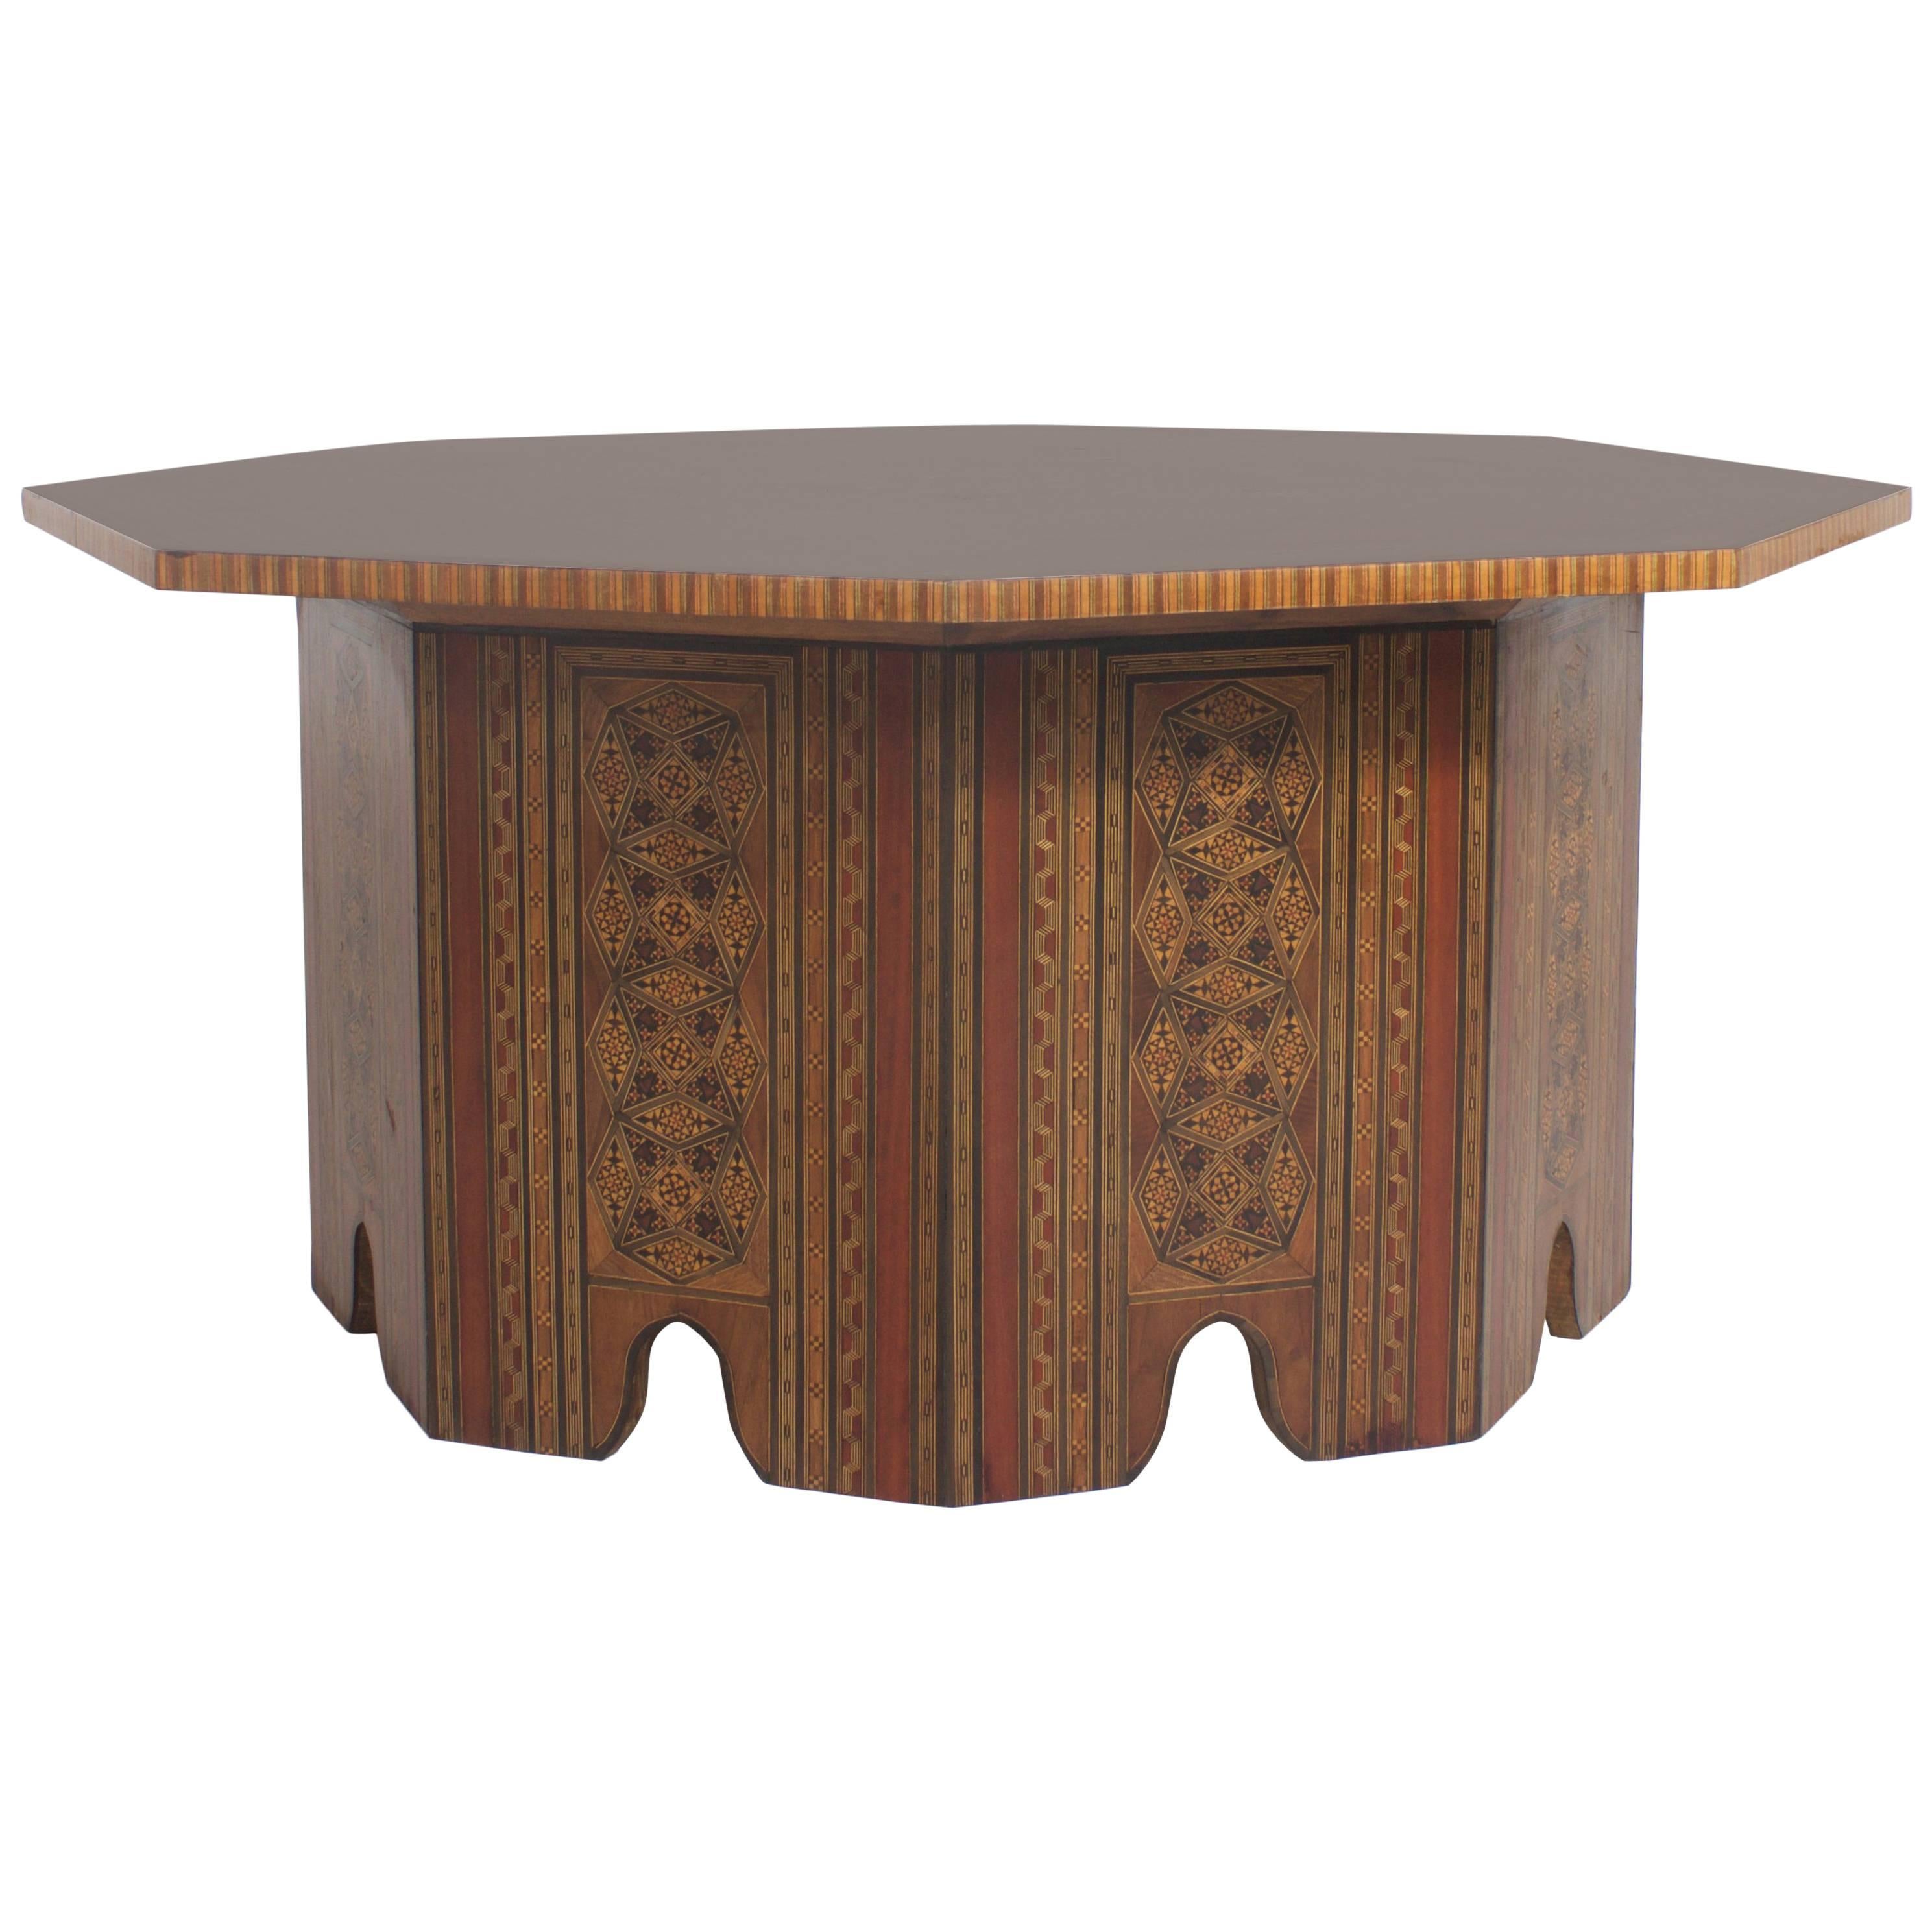 Syrian Marquetry Coffee or Cocktail Table